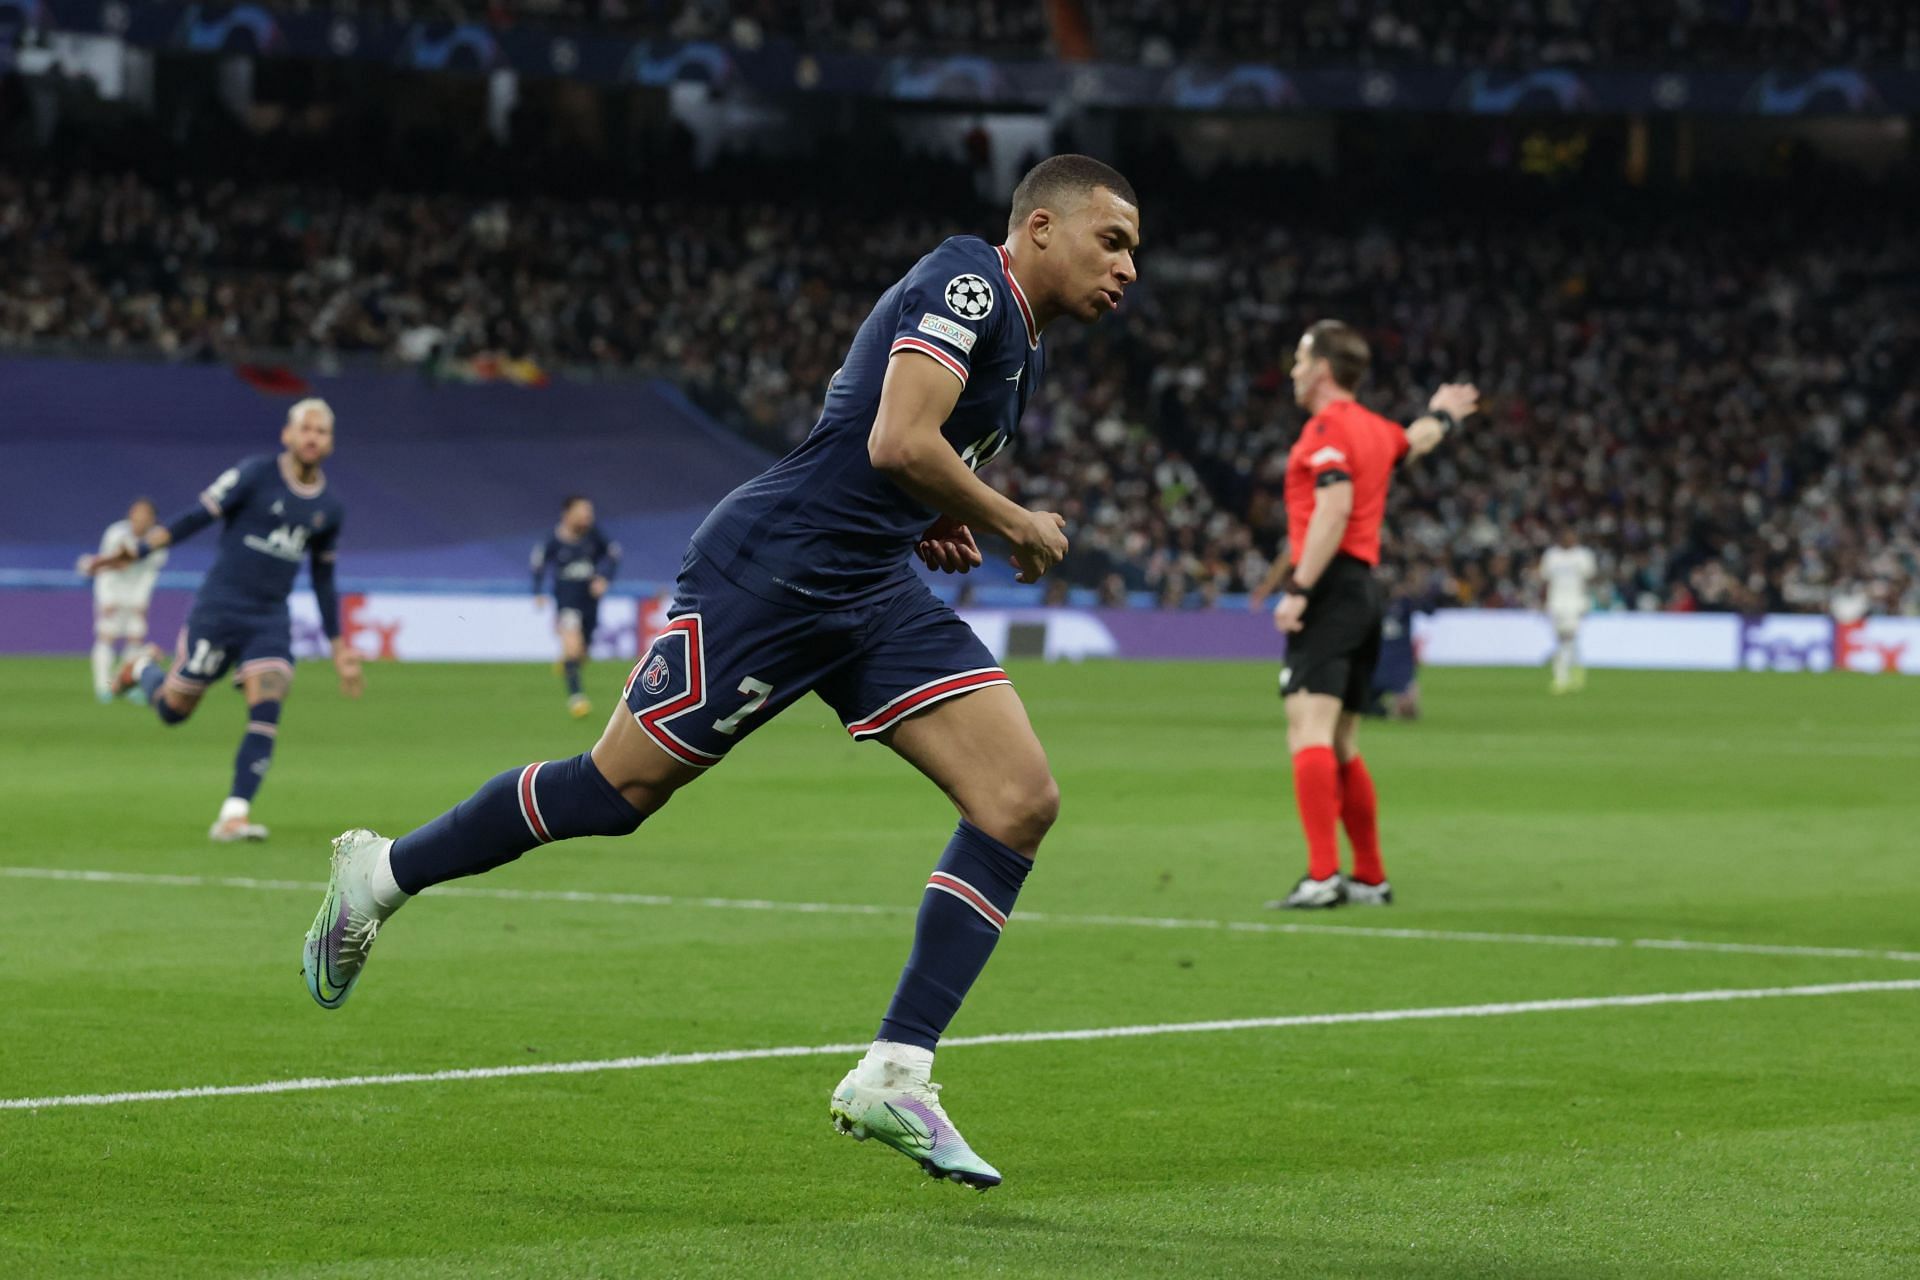 Kylian Mbappe turned down a move to the Santiago Bernabeu this summer.